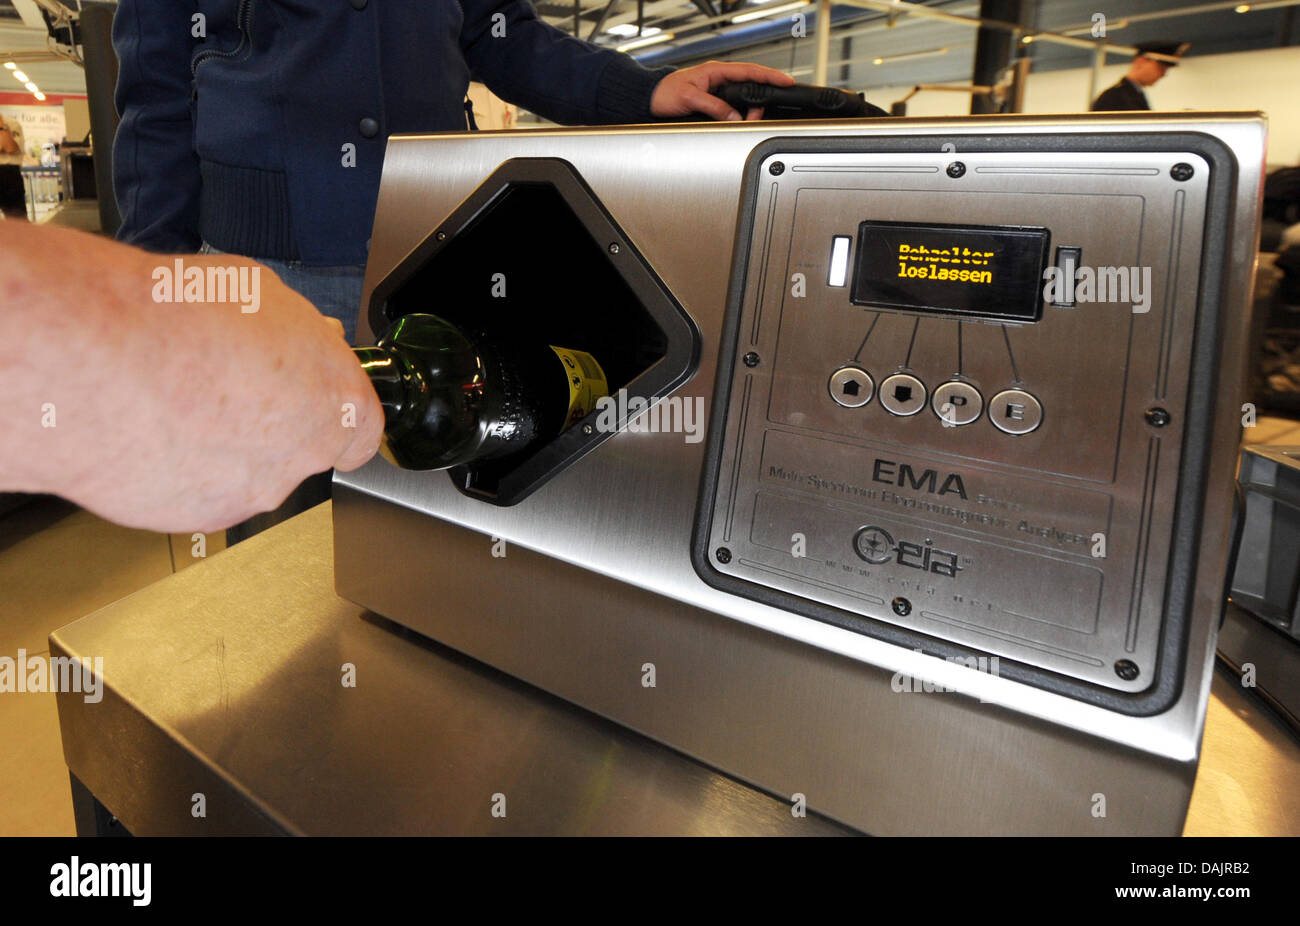 Police officers present a new scanner for liquids at the airport in  Schoenefeld, Germany, 27 April 2011. Due to the introduciton of this device  into the airport system, passangers are allowed to